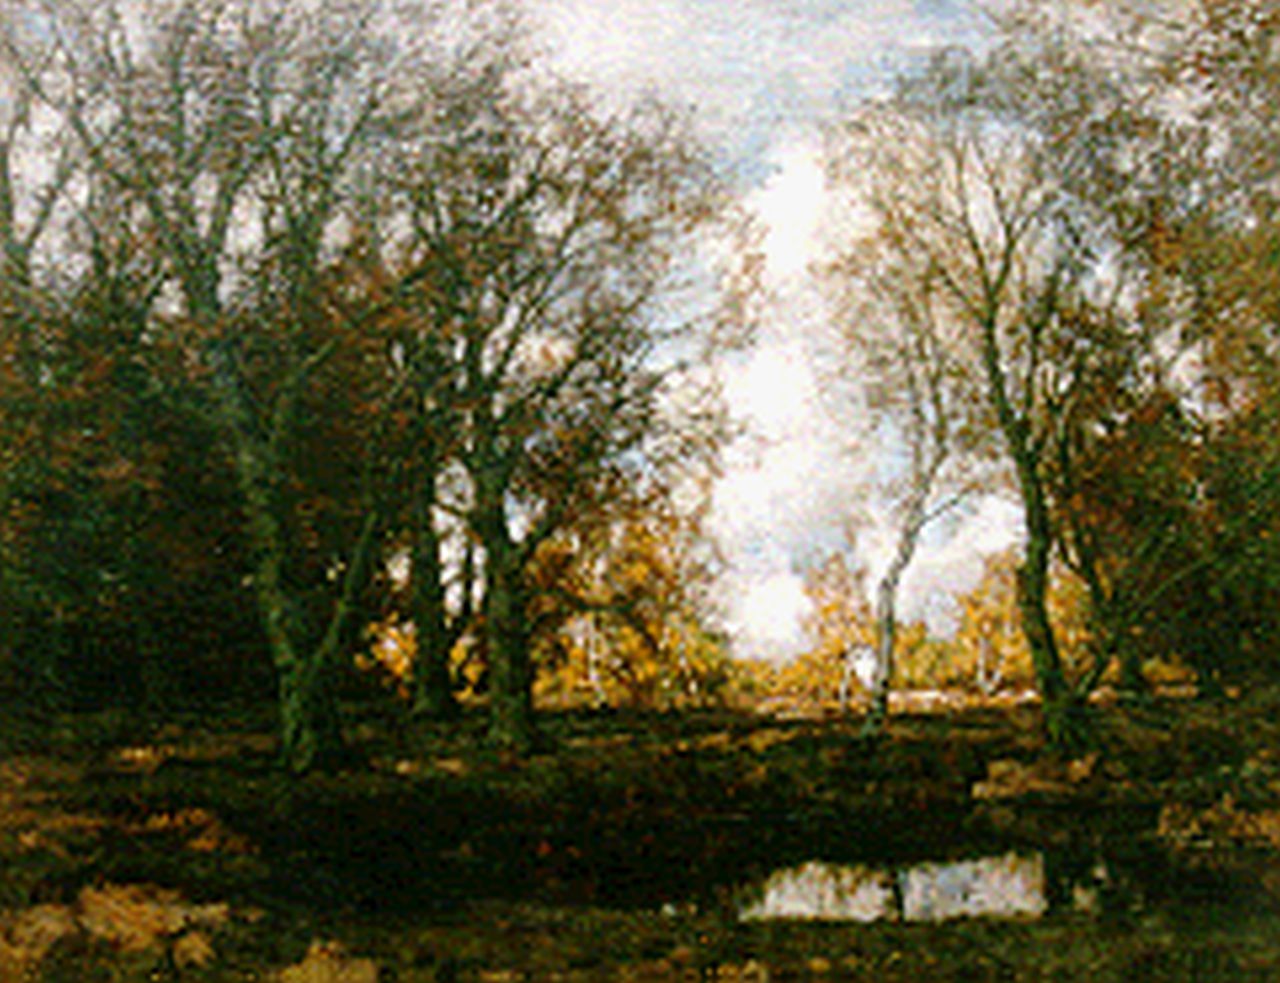 Gorter A.M.  | 'Arnold' Marc Gorter, Birches along the Vordense beek in autumn, oil on canvas 75.5 x 95.5 cm, signed l.r.